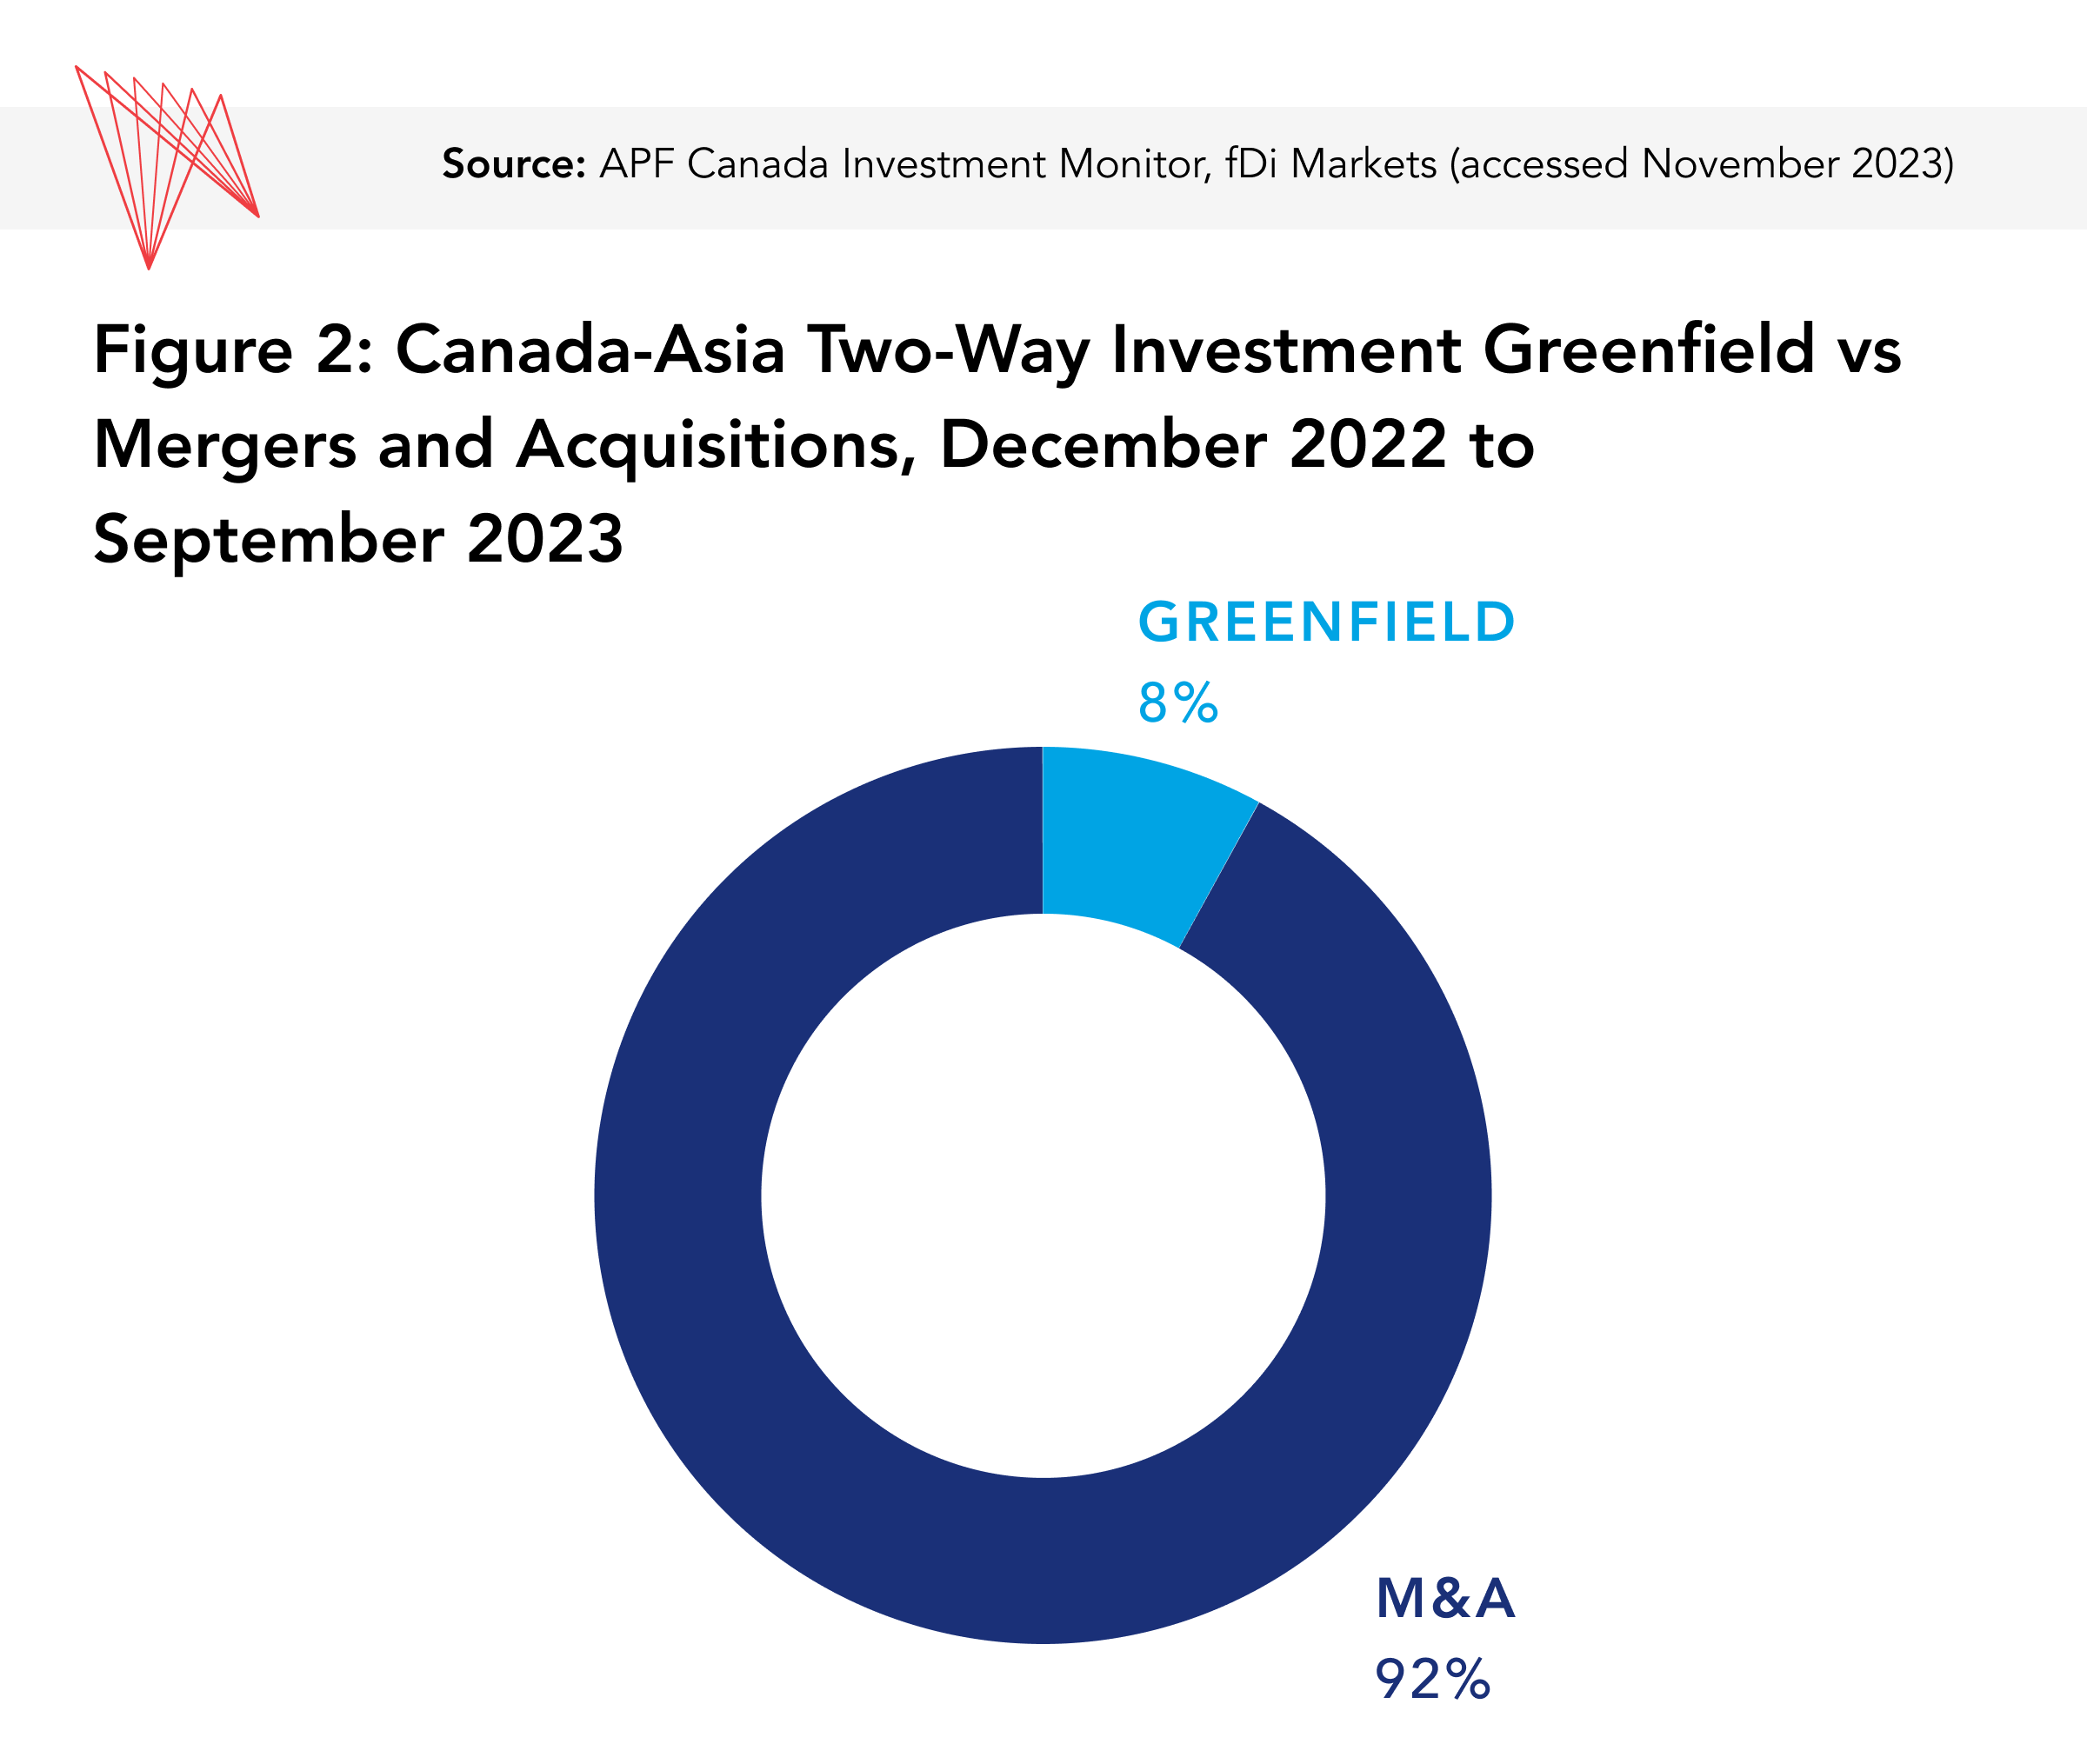 Canada Asia FDI Greenfield and Mergers graphic